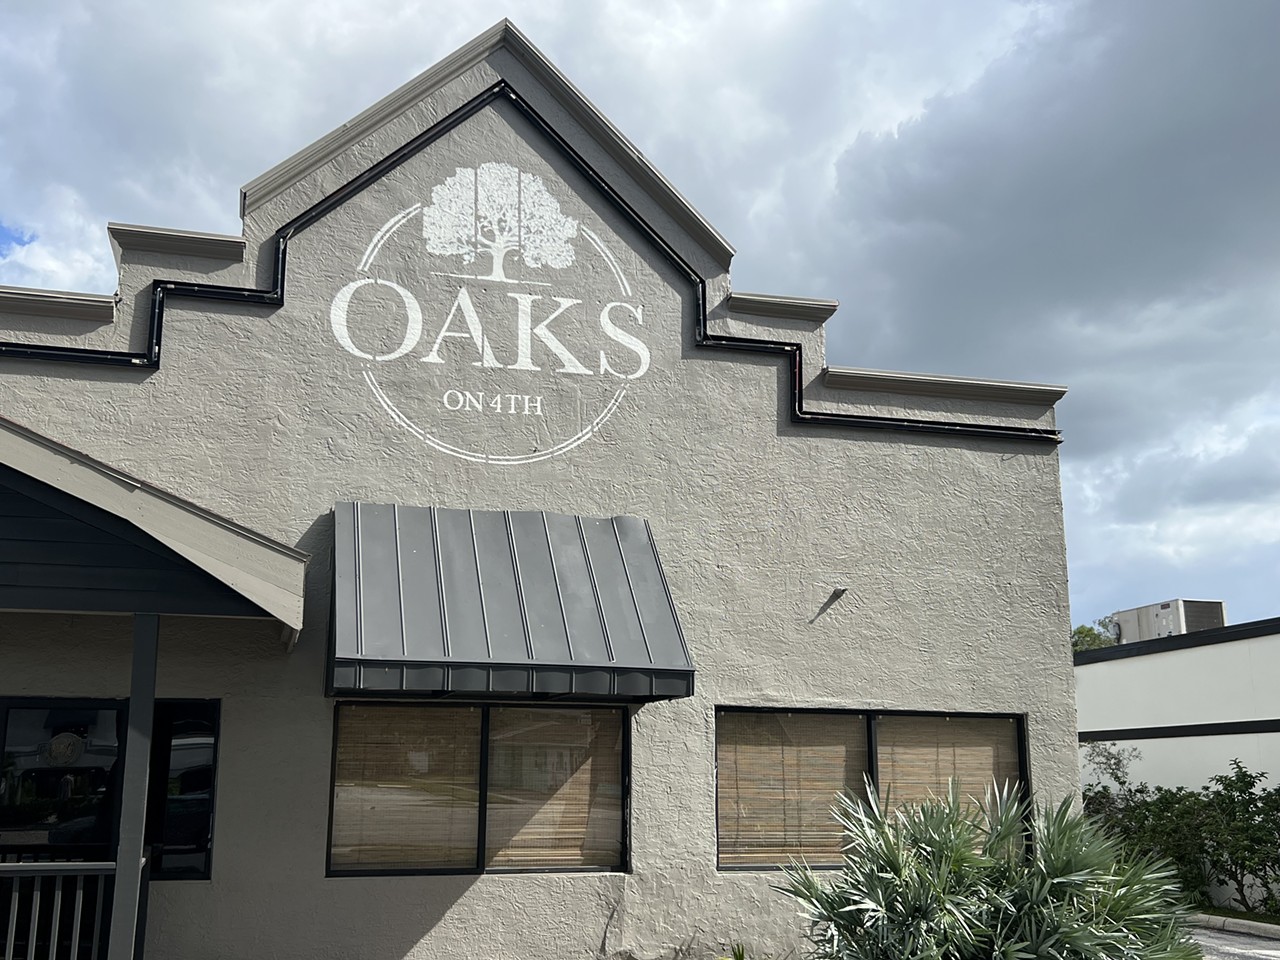 Oaks on 4th
4.5 out 5 stars, 15 reviews
4351 4th St. N, St. Petersburg
”Delicious dinner, great service. The interior is wonderful for a nice dinner but a bit loud. Happy hour is a nice deal for appetizers! The grilled oyster appetizers are amazing!  The child's hamburger was well done but we ordered it medium rare. Overall, great food!” - Deborah E.
Photo via Kyla Fields